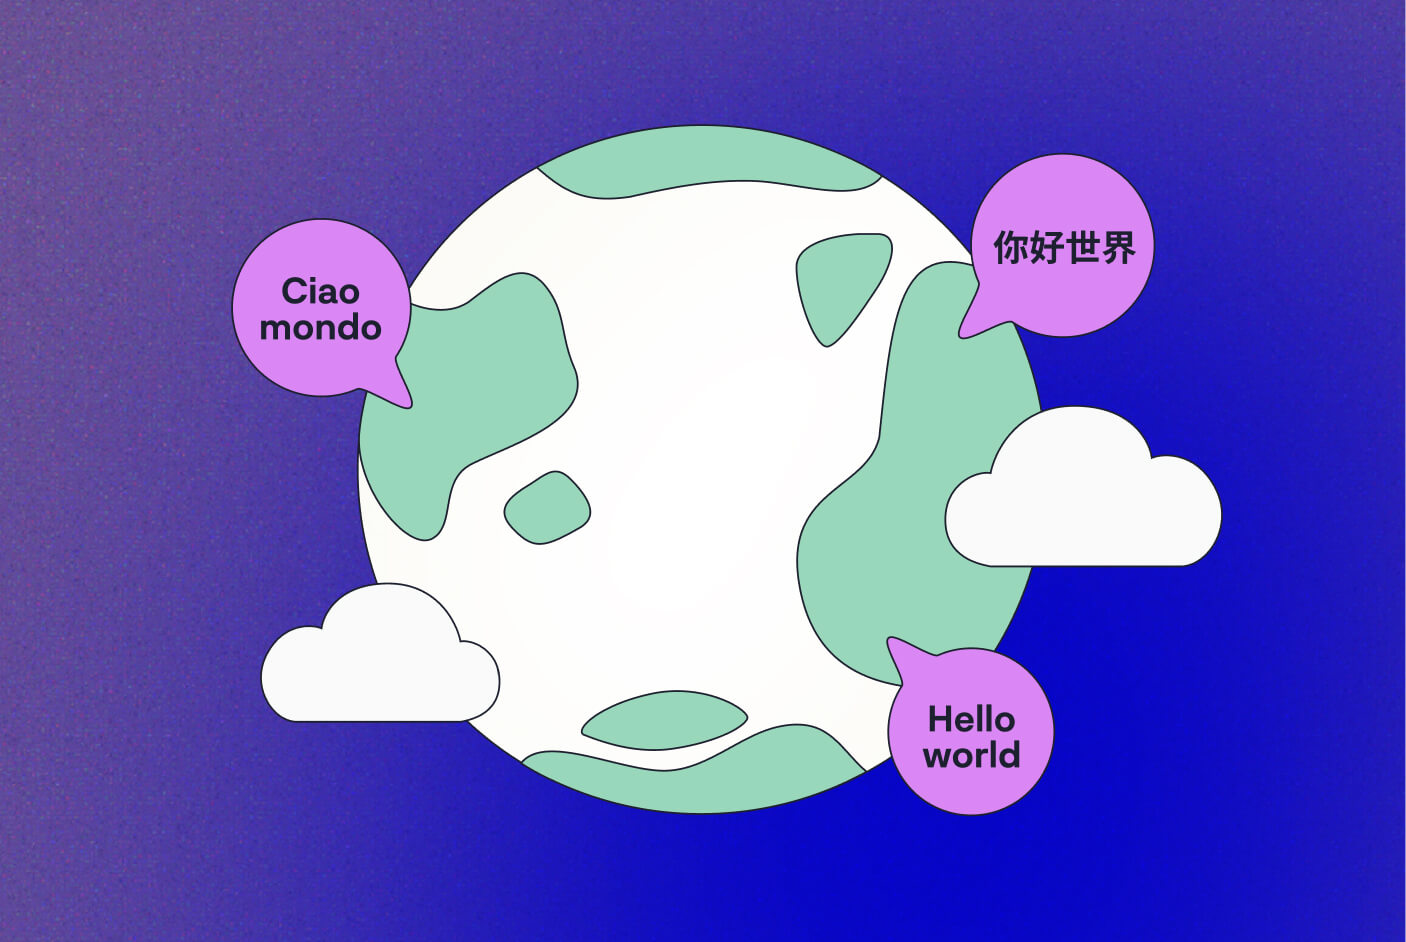 A graphic of the world with "Hello World" in several different languages